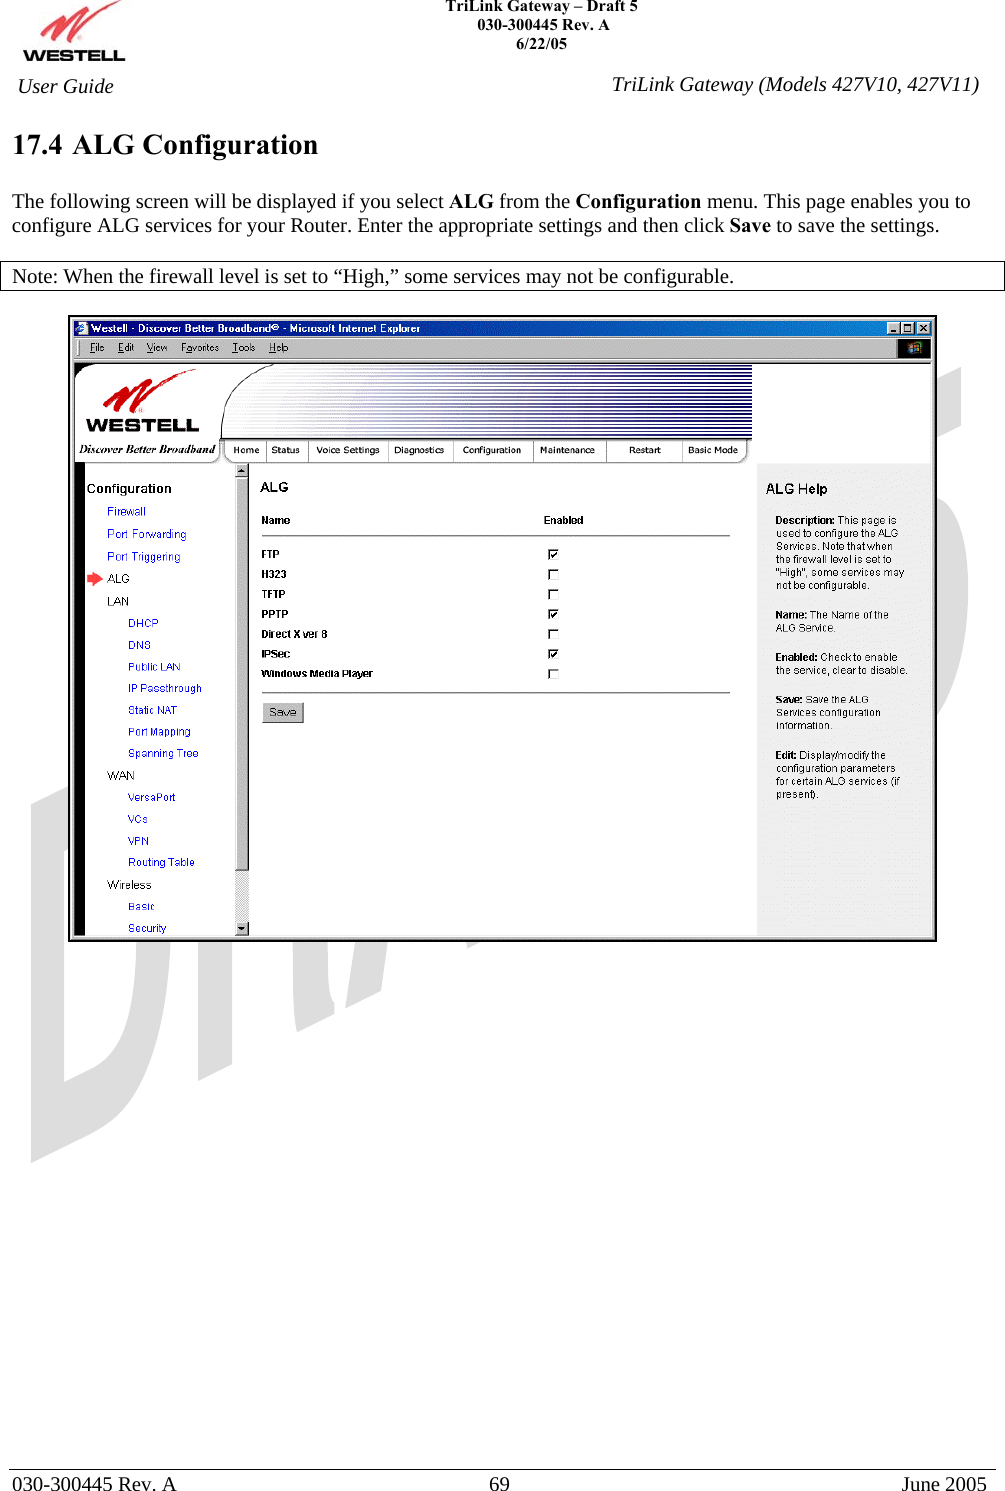    TriLink Gateway – Draft 5   030-300445 Rev. A 6/22/05   030-300445 Rev. A  69  June 2005  User Guide  TriLink Gateway (Models 427V10, 427V11)17.4 ALG Configuration  The following screen will be displayed if you select ALG from the Configuration menu. This page enables you to configure ALG services for your Router. Enter the appropriate settings and then click Save to save the settings.   Note: When the firewall level is set to “High,” some services may not be configurable.                        